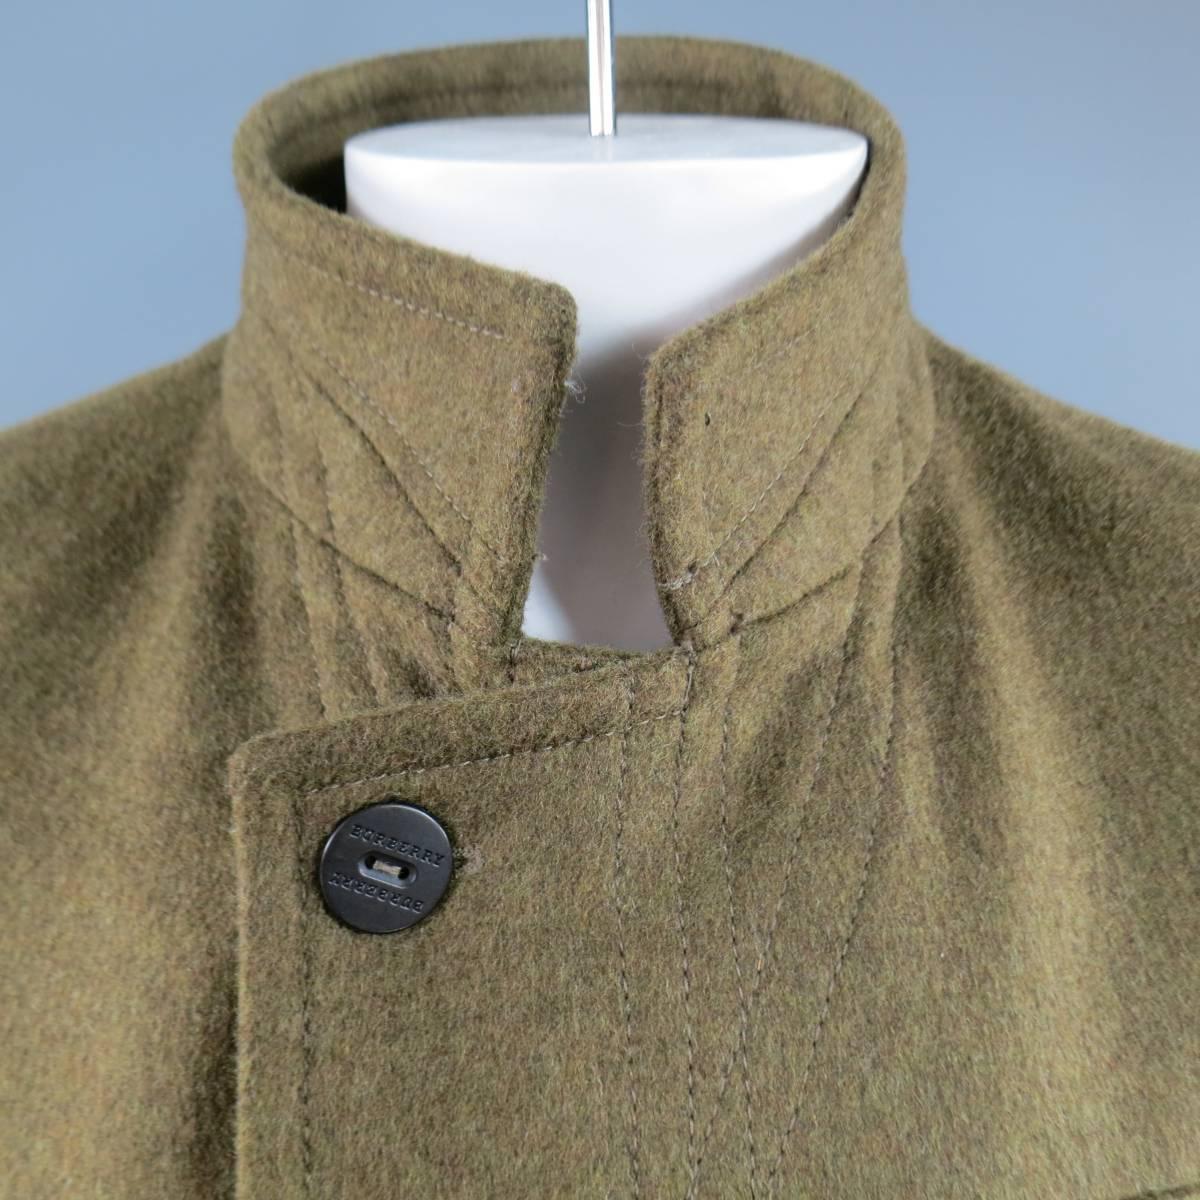 This military style coat from BURBERRY comes in a heavy olive green wool flannel with hints of brown Heather and features a high neck, black engraved buttons, patch flap pockets with applique panel details, and back band detail. Made in Italy.
